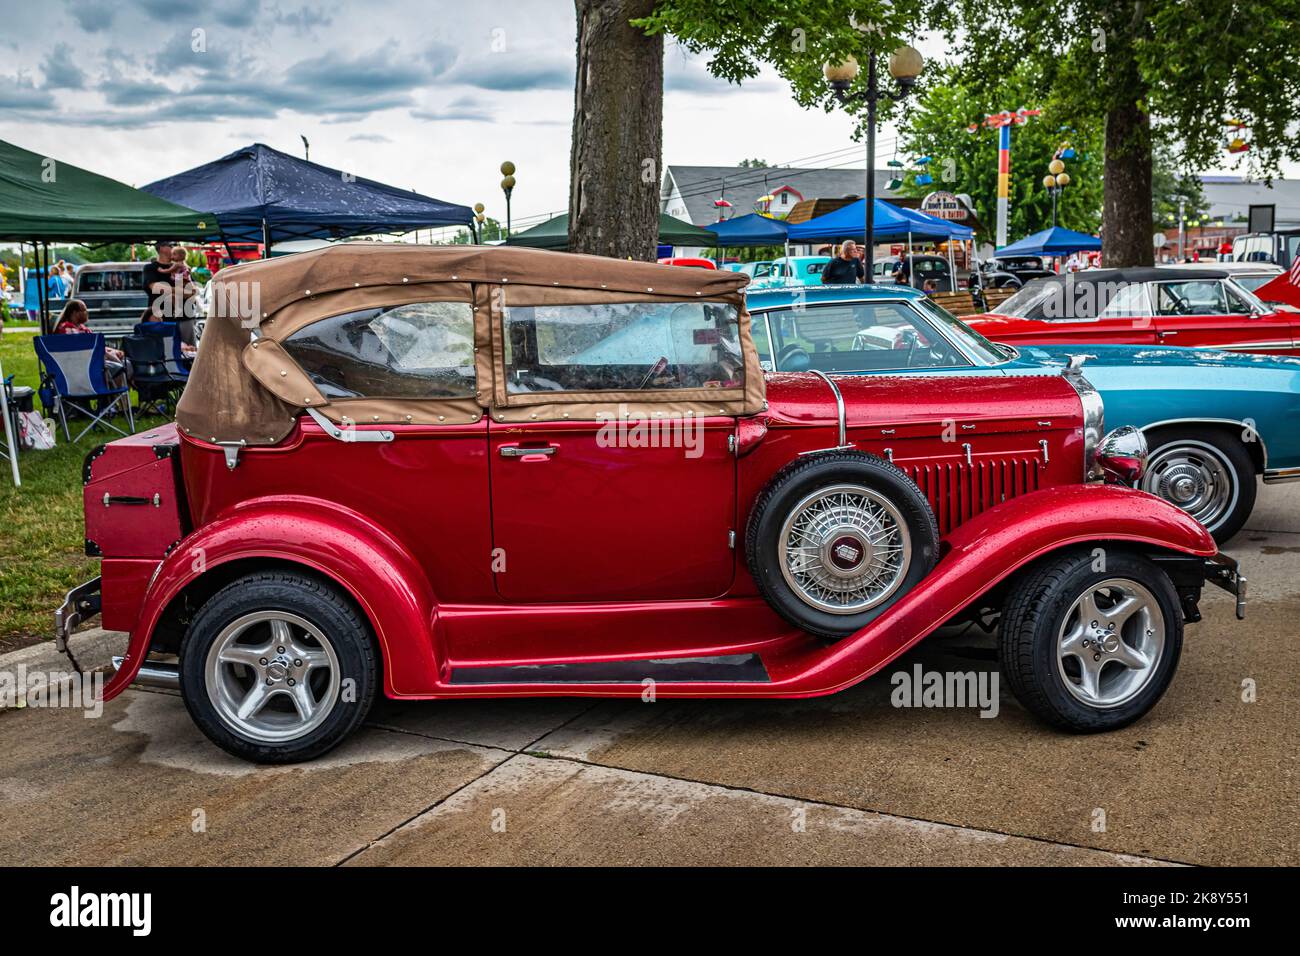 Des Moines, IA - July 01, 2022: High perspective side view of a 1931 Ford Model A Phaeton at a local car show. Stock Photo